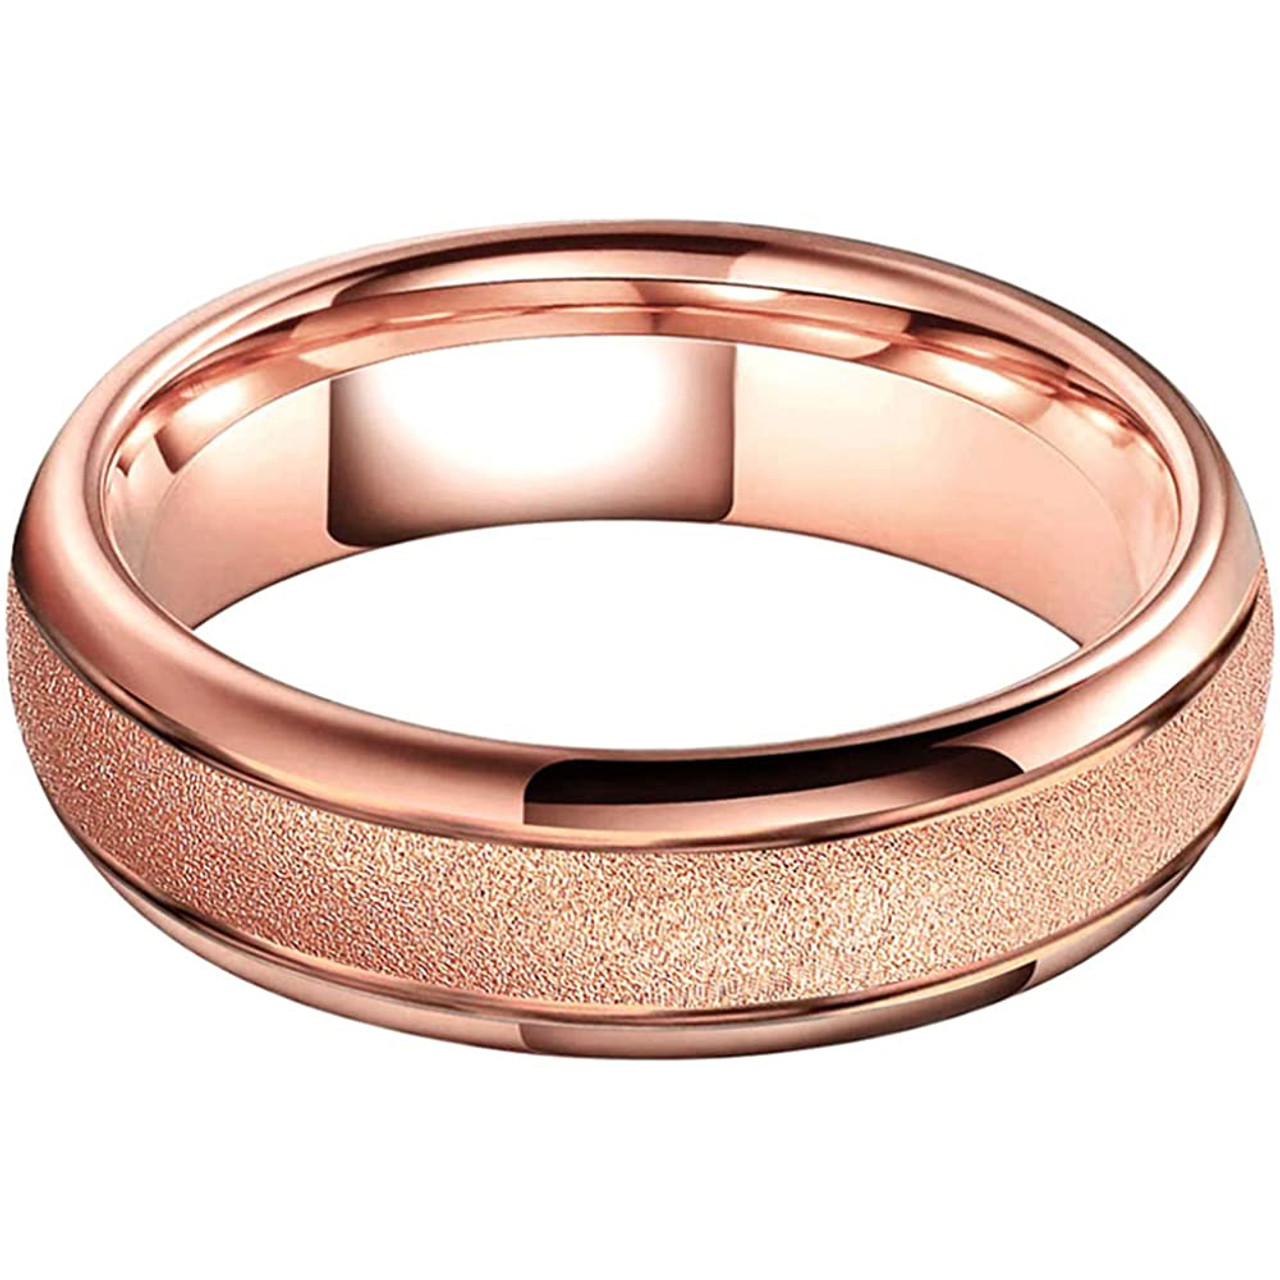 6mm) Unisex or Women's Tungsten Carbide Wedding Ring Band. Rose Gold Domed  Top Ring. Sand Blasted Glitter Design with High Polish Edges. Comfort Fit.  - Ring Blingers